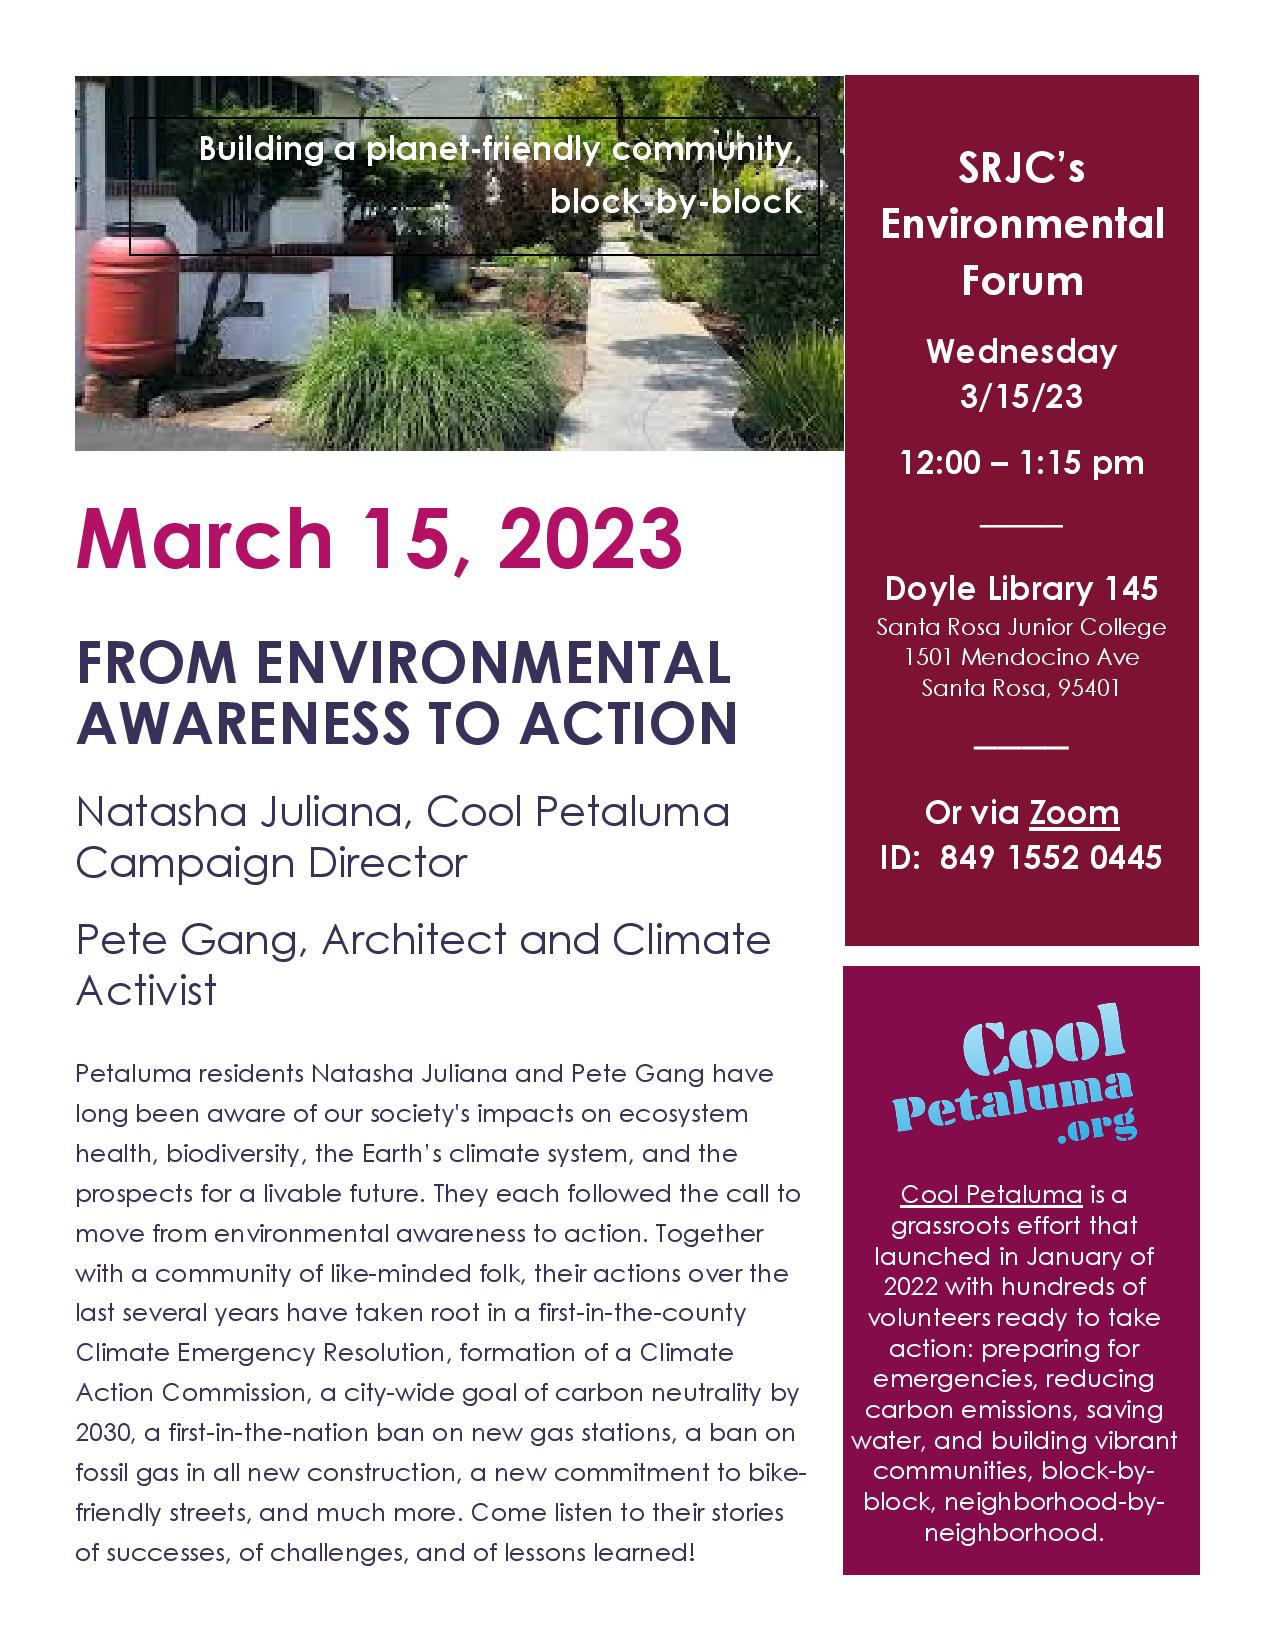 SRJC’s Environmental Forum Wednesday 3/15/23 12:00 – 1:15 pm ──── Doyle Library 145 Santa Rosa Junior College 1501 Mendocino Ave Santa Rosa, 95401 ──── Or via Zoom ID: 849 1552 0445. March 15, 2023 FROM ENVIRONMENTAL AWARENESS TO ACTION Natasha Juliana, Cool Petaluma Campaign Director Pete Gang, Architect and Climate Activist. Petaluma residents Natasha Juliana and Pete Gang have long been aware of our society's impacts on ecosystem health, biodiversity, the Earth’s climate system, and the prospects for a livable future. They each followed the call to move from environmental awareness to action. Together with a community of like-minded folk, their actions over the last several years have taken root in a first-in-the-county Climate Emergency Resolution, formation of a Climate Action Commission, a city-wide goal of carbon neutrality by 2030, a first-in-the-nation ban on new gas stations, a ban on fossil gas in all new construction, a new commitment to bikefriendly streets, and much more. Come listen to their stories of successes, of challenges, and of lessons learned! Cool Petaluma is a grassroots effort that launched in January of 2022 with hundreds of volunteers ready to take action: preparing for emergencies, reducing carbon emissions, saving water, and building vibrant communities, block-byblock, neighborhood-byneighborhood.